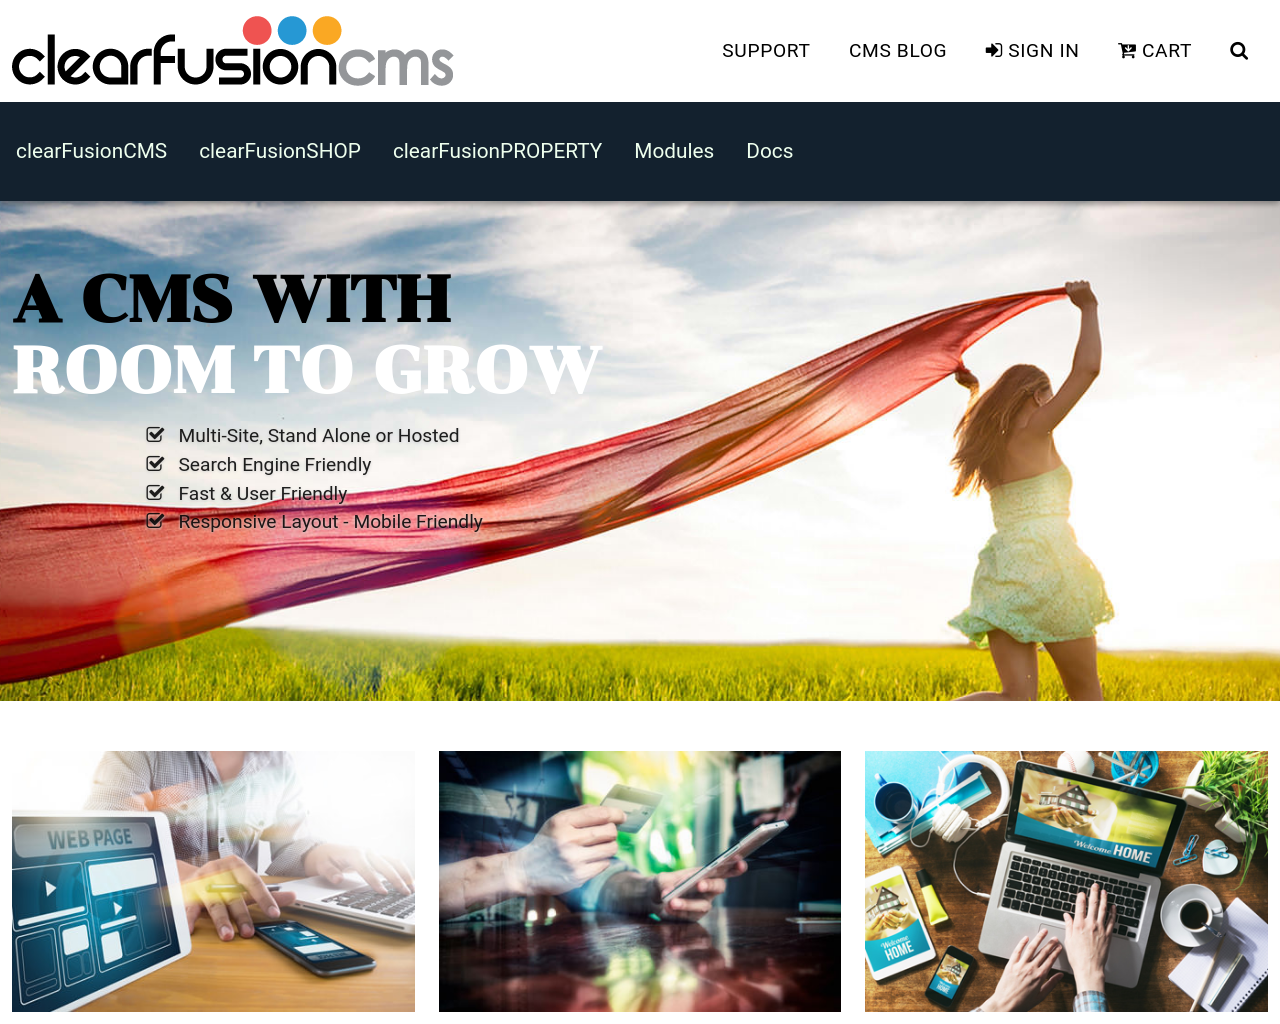 clearfusioncms.com